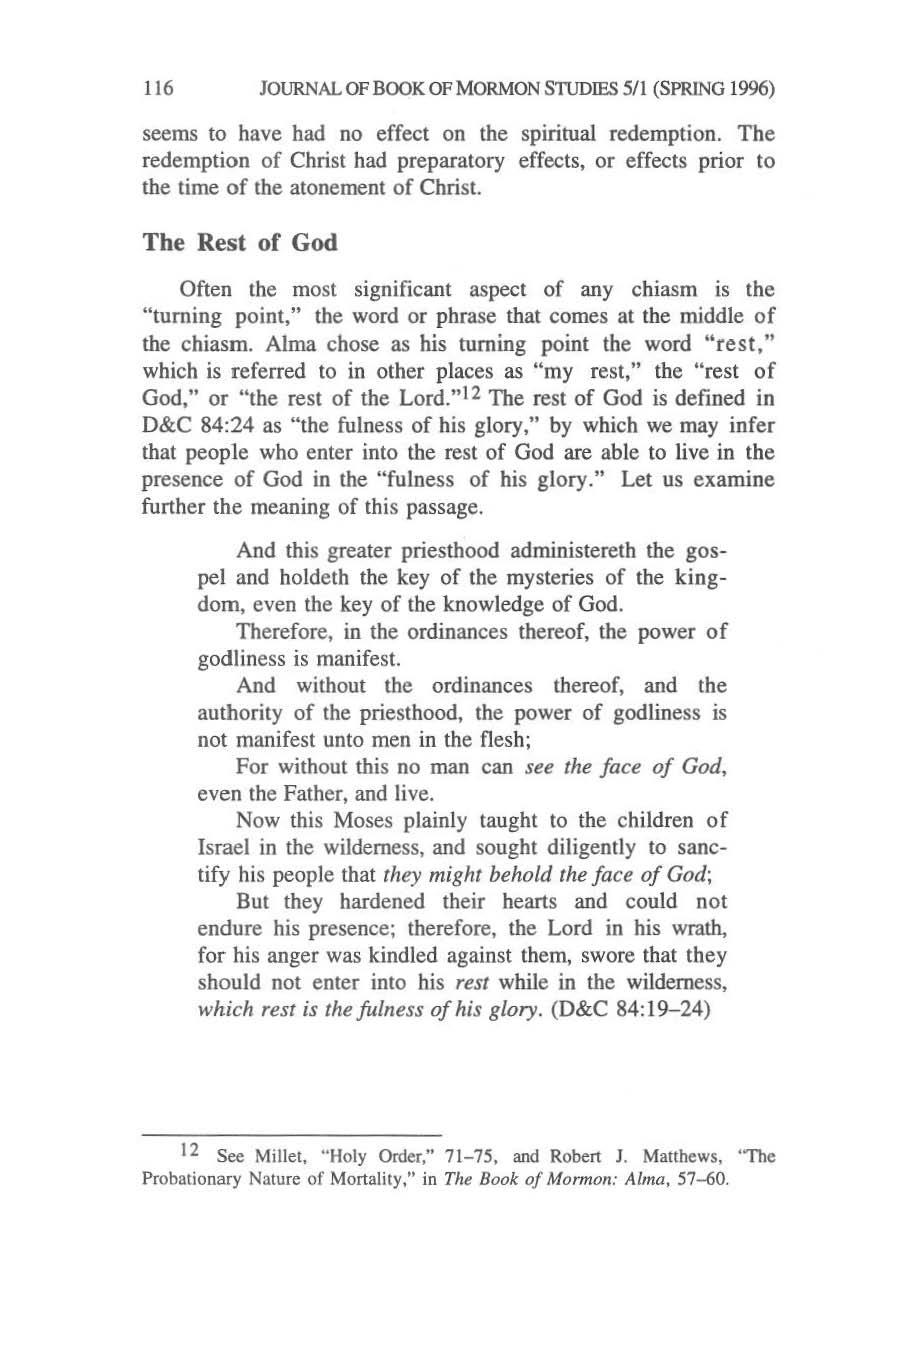 116 JOURNAL OF BOOK OF MORMON S'ruD1ES 5/1 (SPRING 1996) seems to have had no effect on the spiritual redemption.